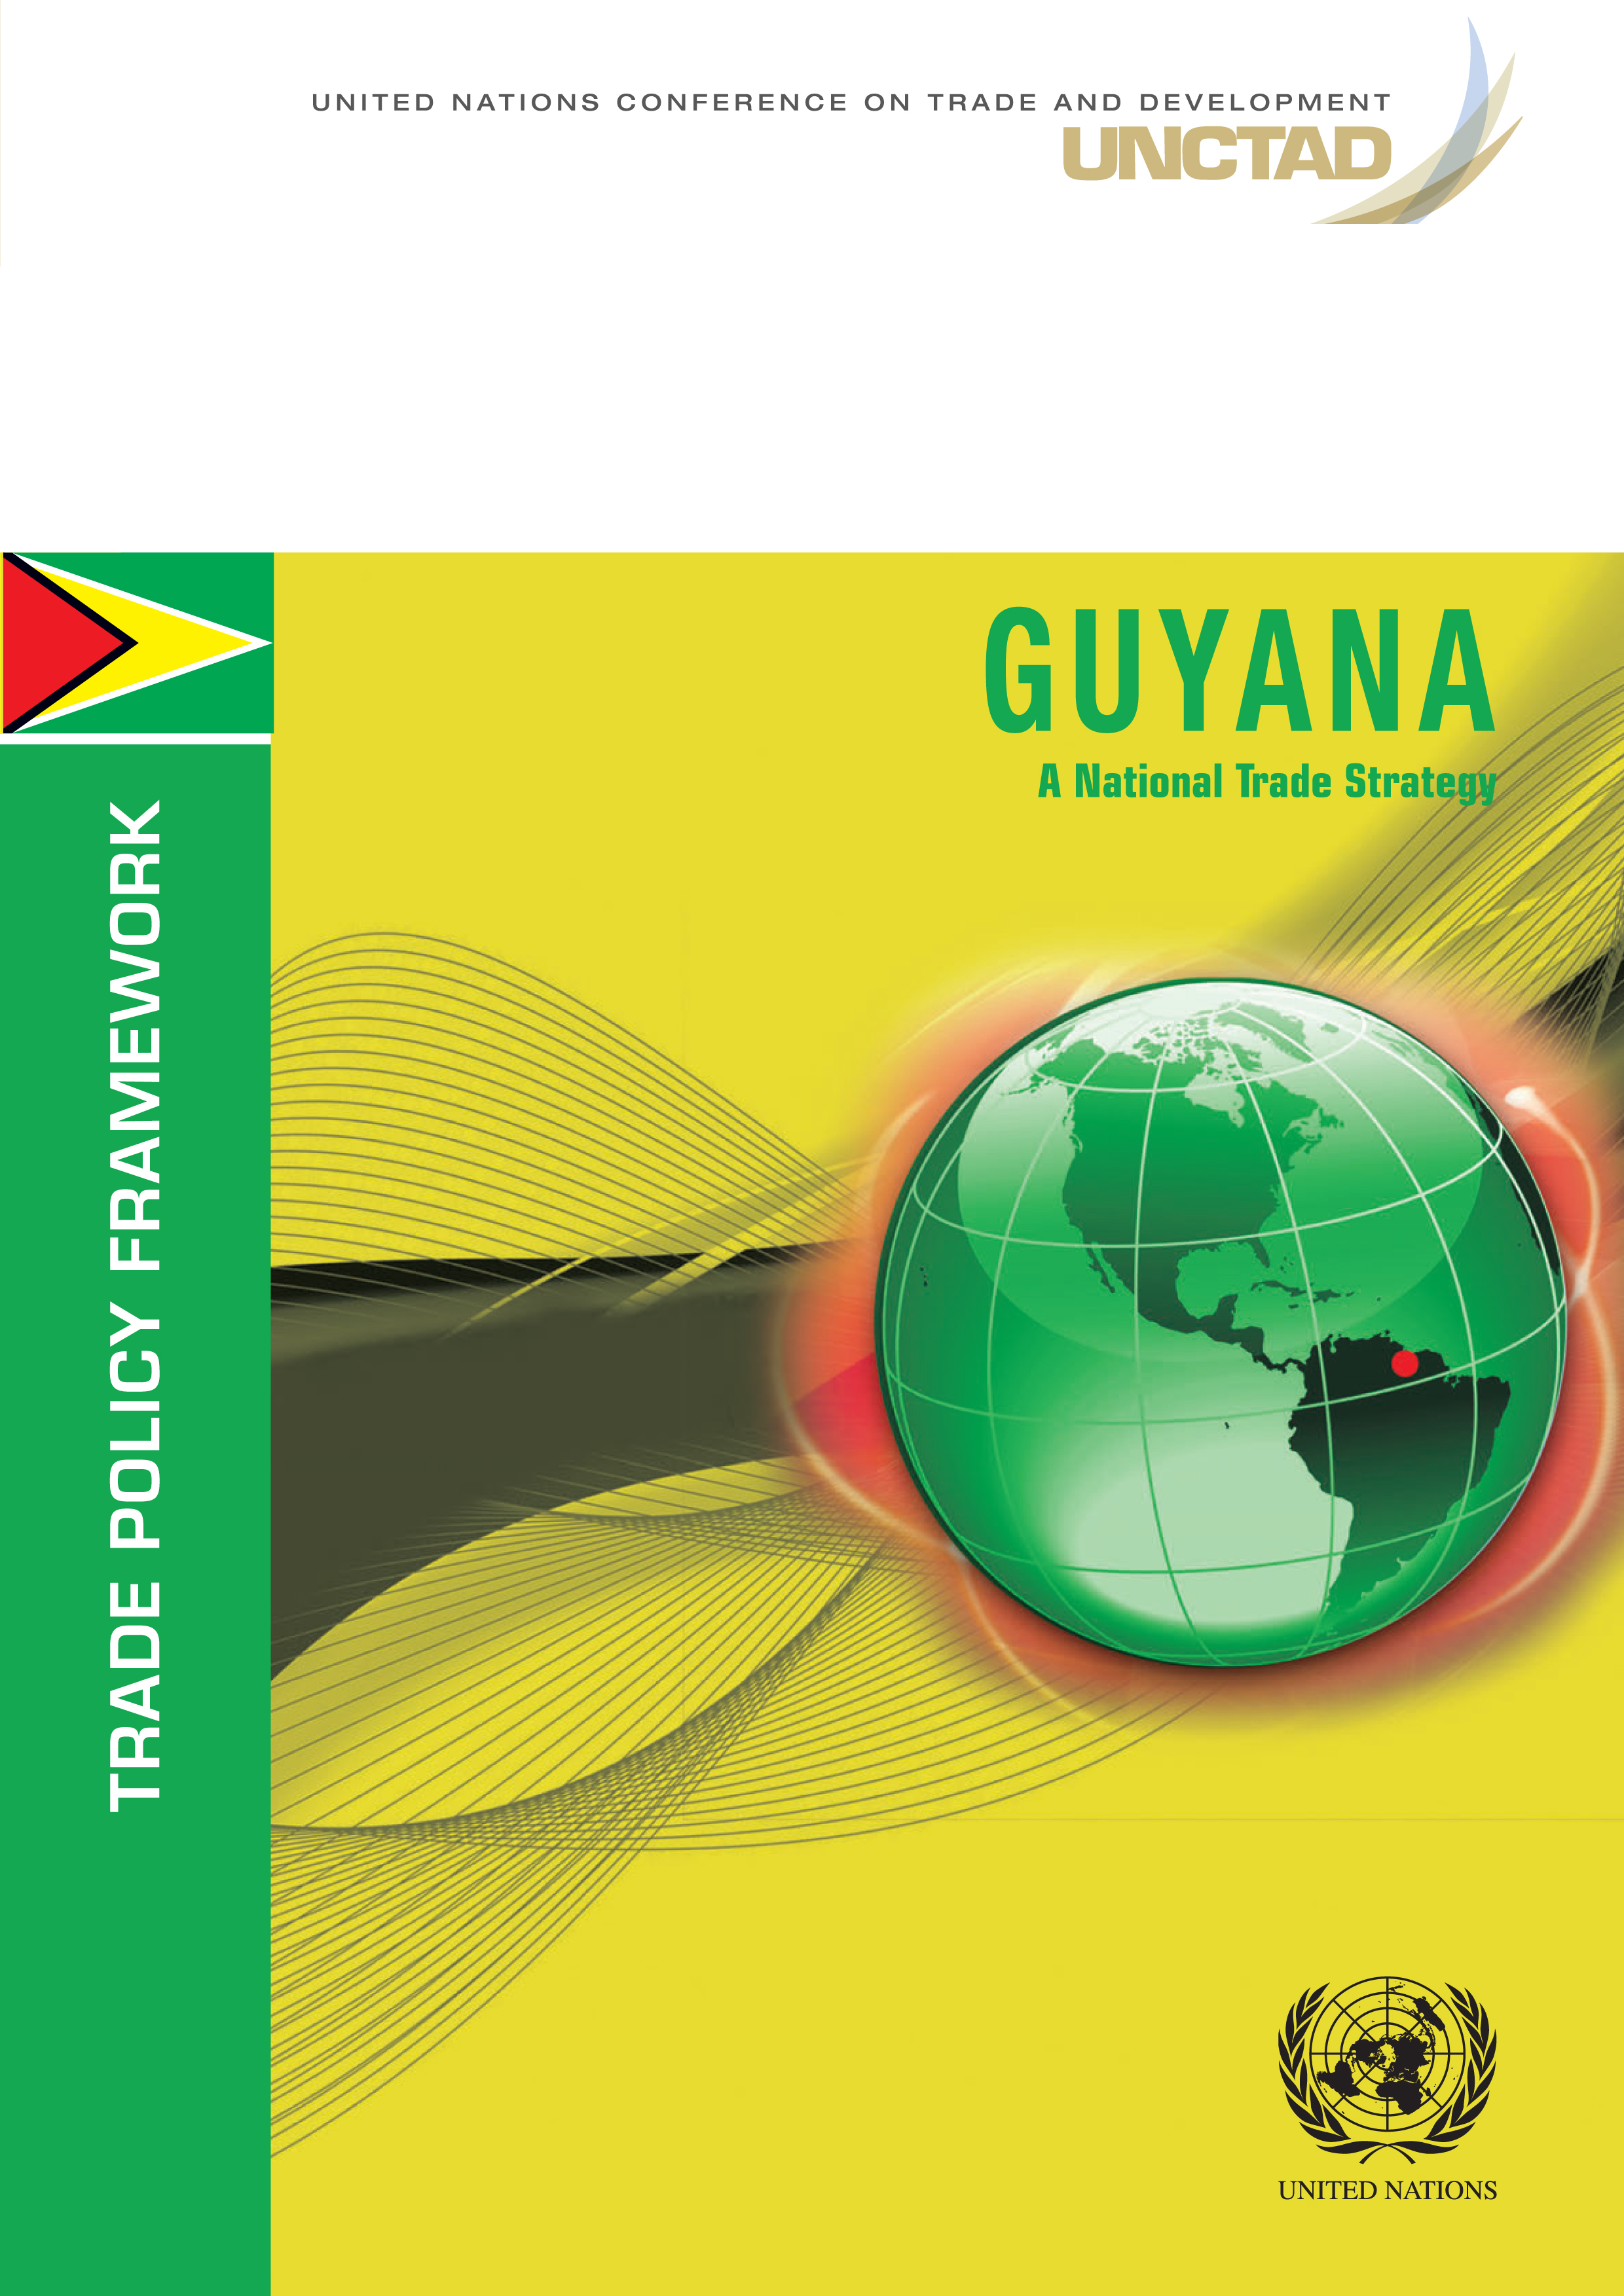 image of Options for guyana’s trade strategy